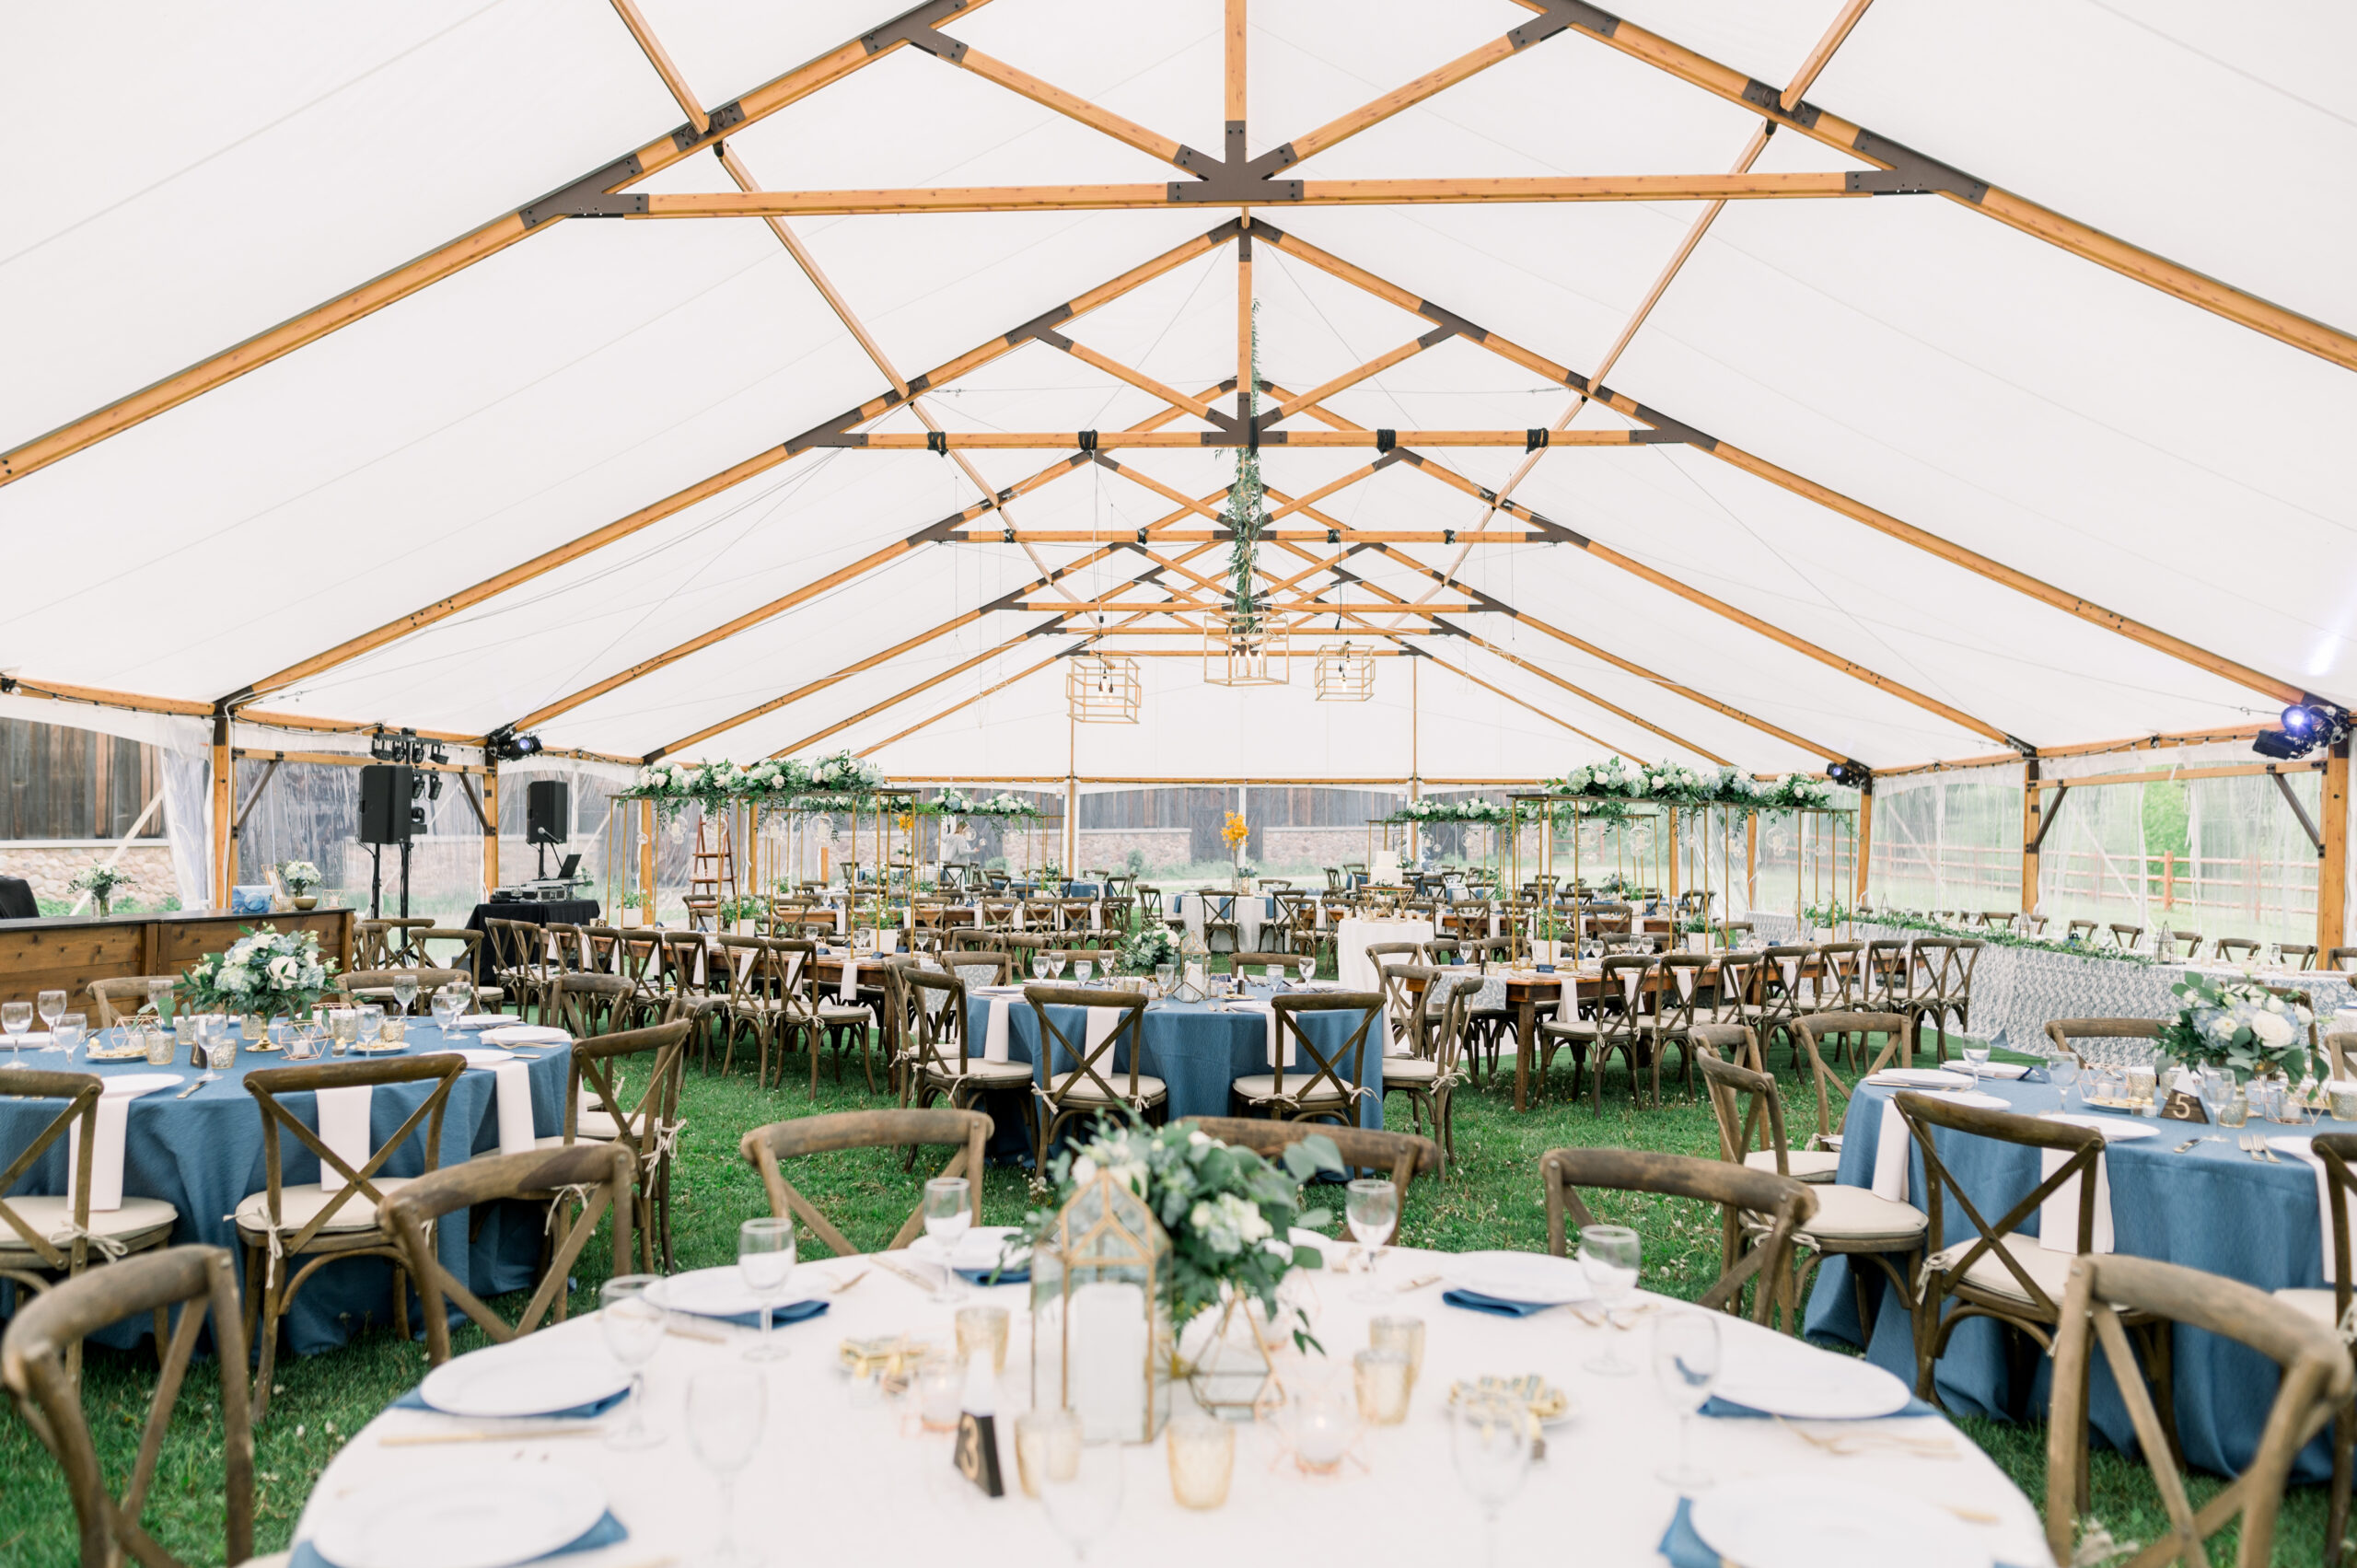 Banquet seating on a lawn for a wedding dinner reception, under a frame tent decorated with greenery.